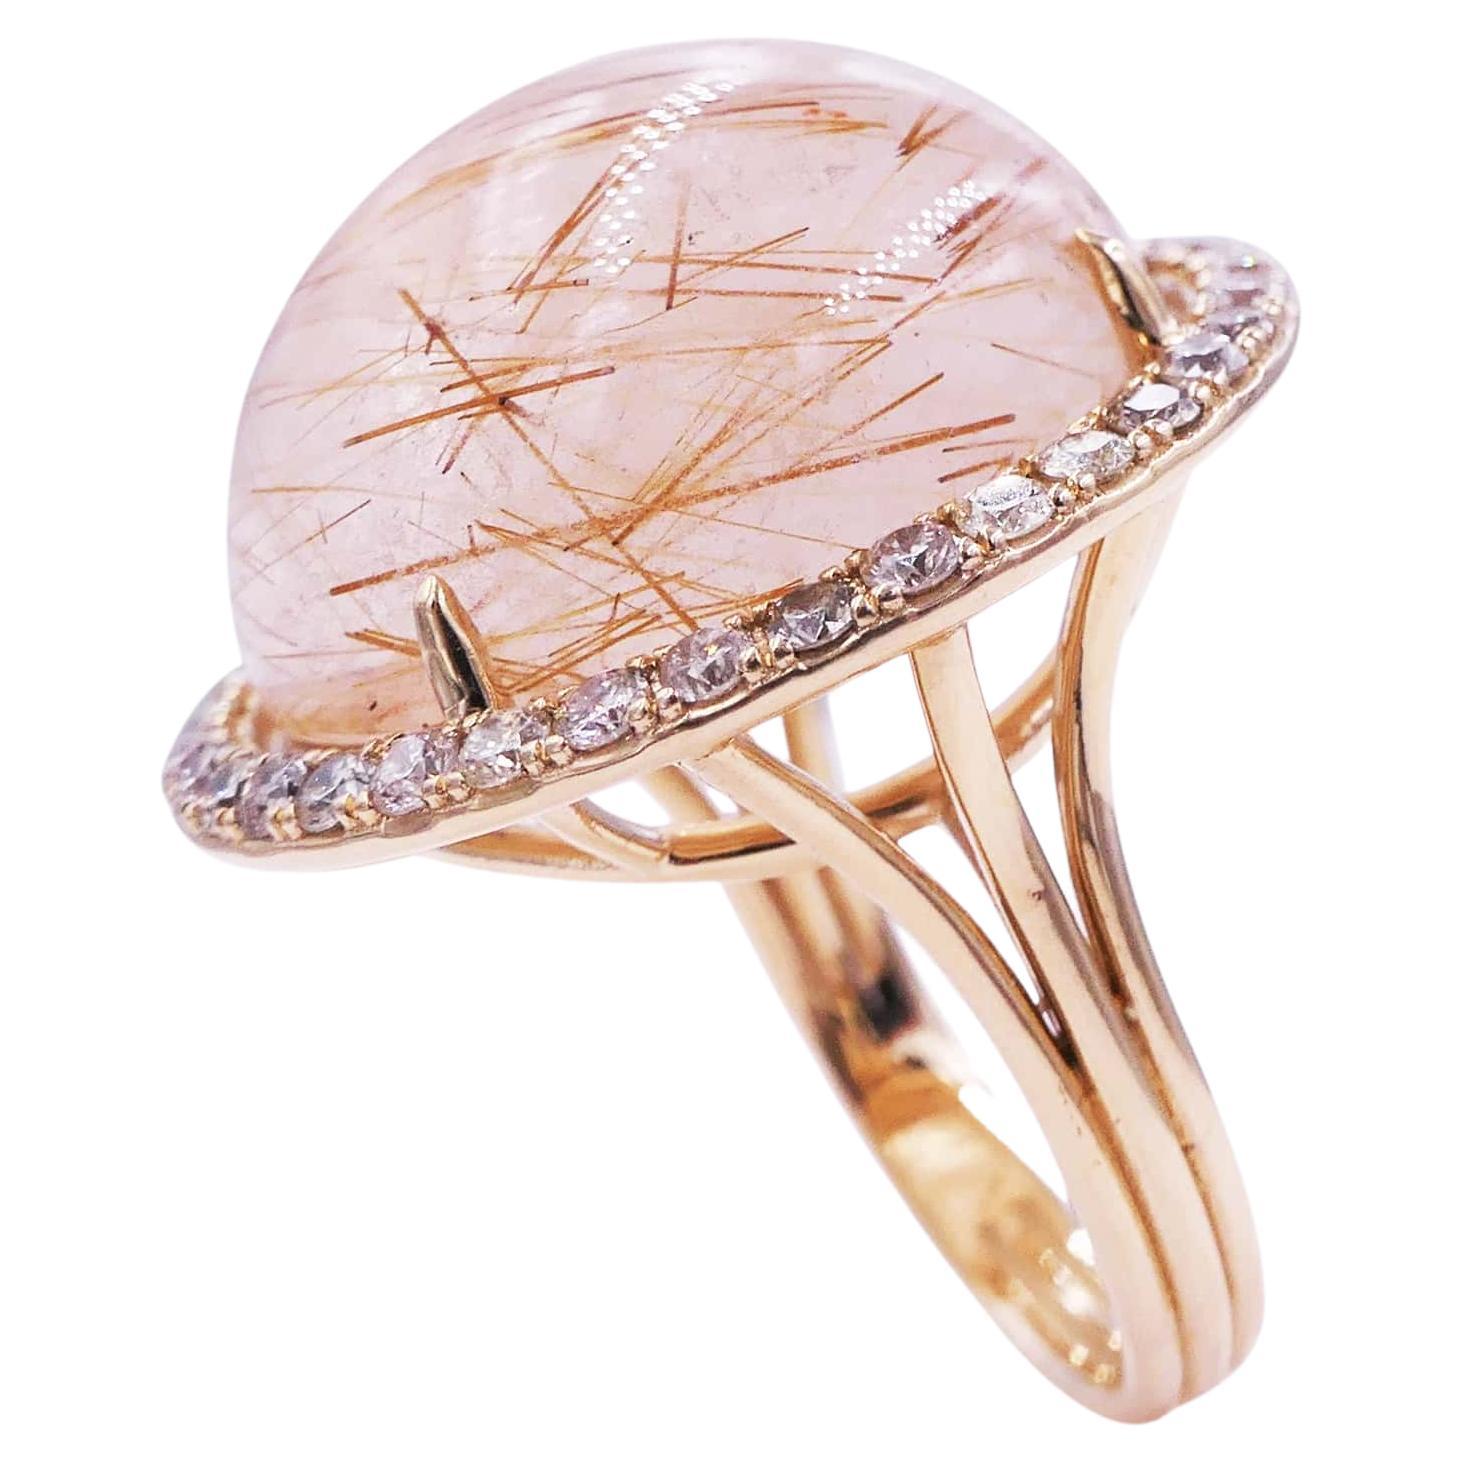 Rutilated Pink Quartz Round Cabochon Halo Diamonds 14 Karat Yellow Gold Ring
14 Karat Yellow Gold
Rutilated Quartz
0.50 cts Diamonds
Size 7, Resizable upon request 

Important Information:
Please note that this item will take 2-4 weeks to deliver -